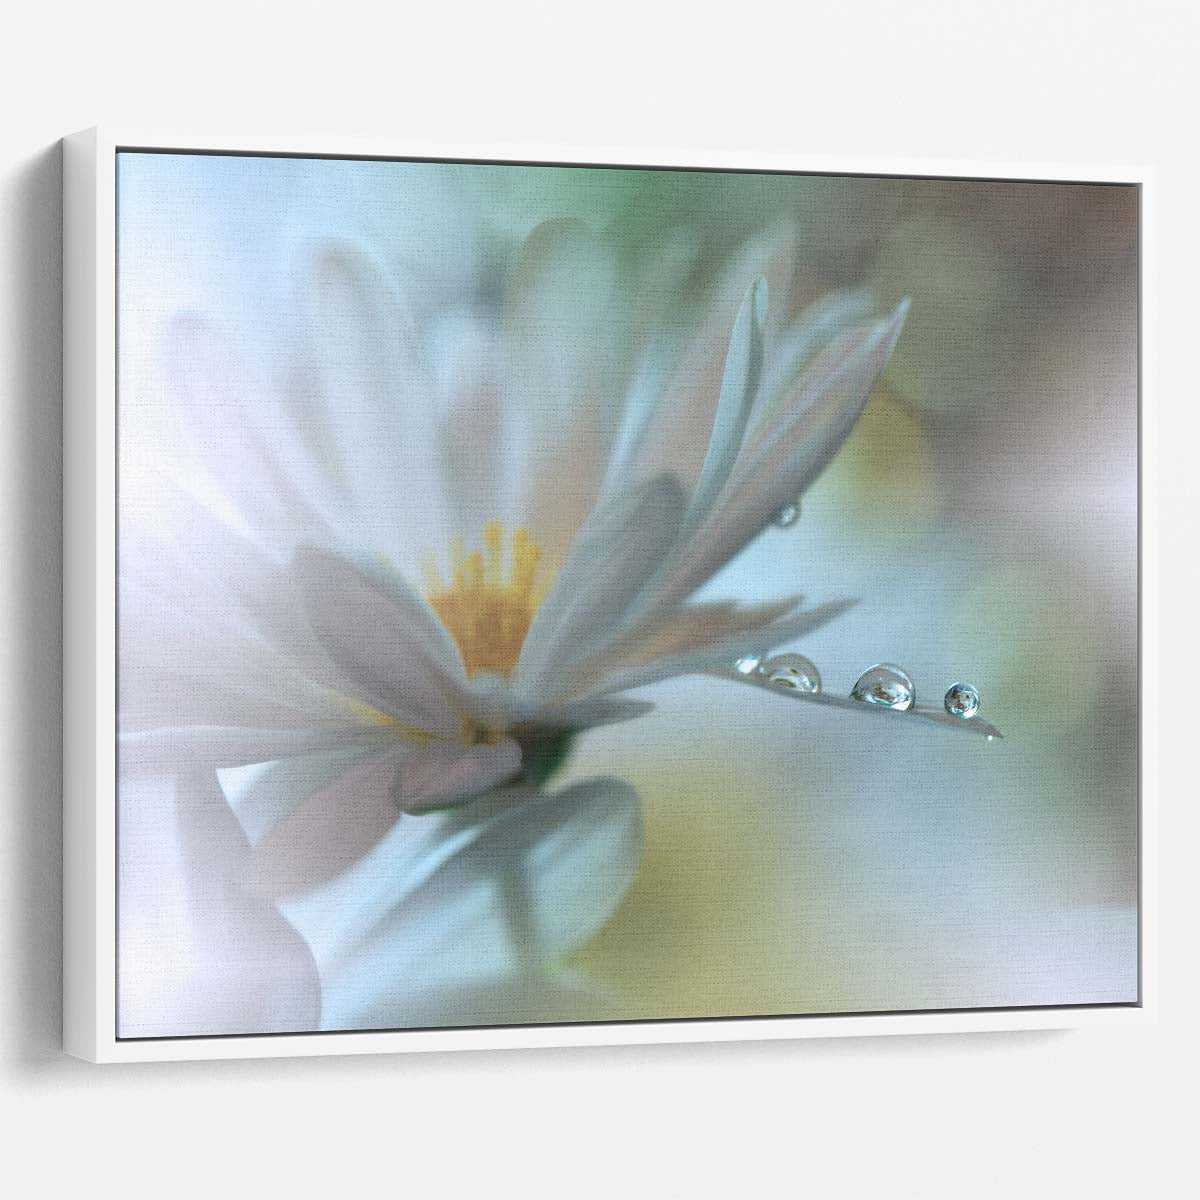 Delicate Daisy & Water Droplets Macro Photography Wall Art